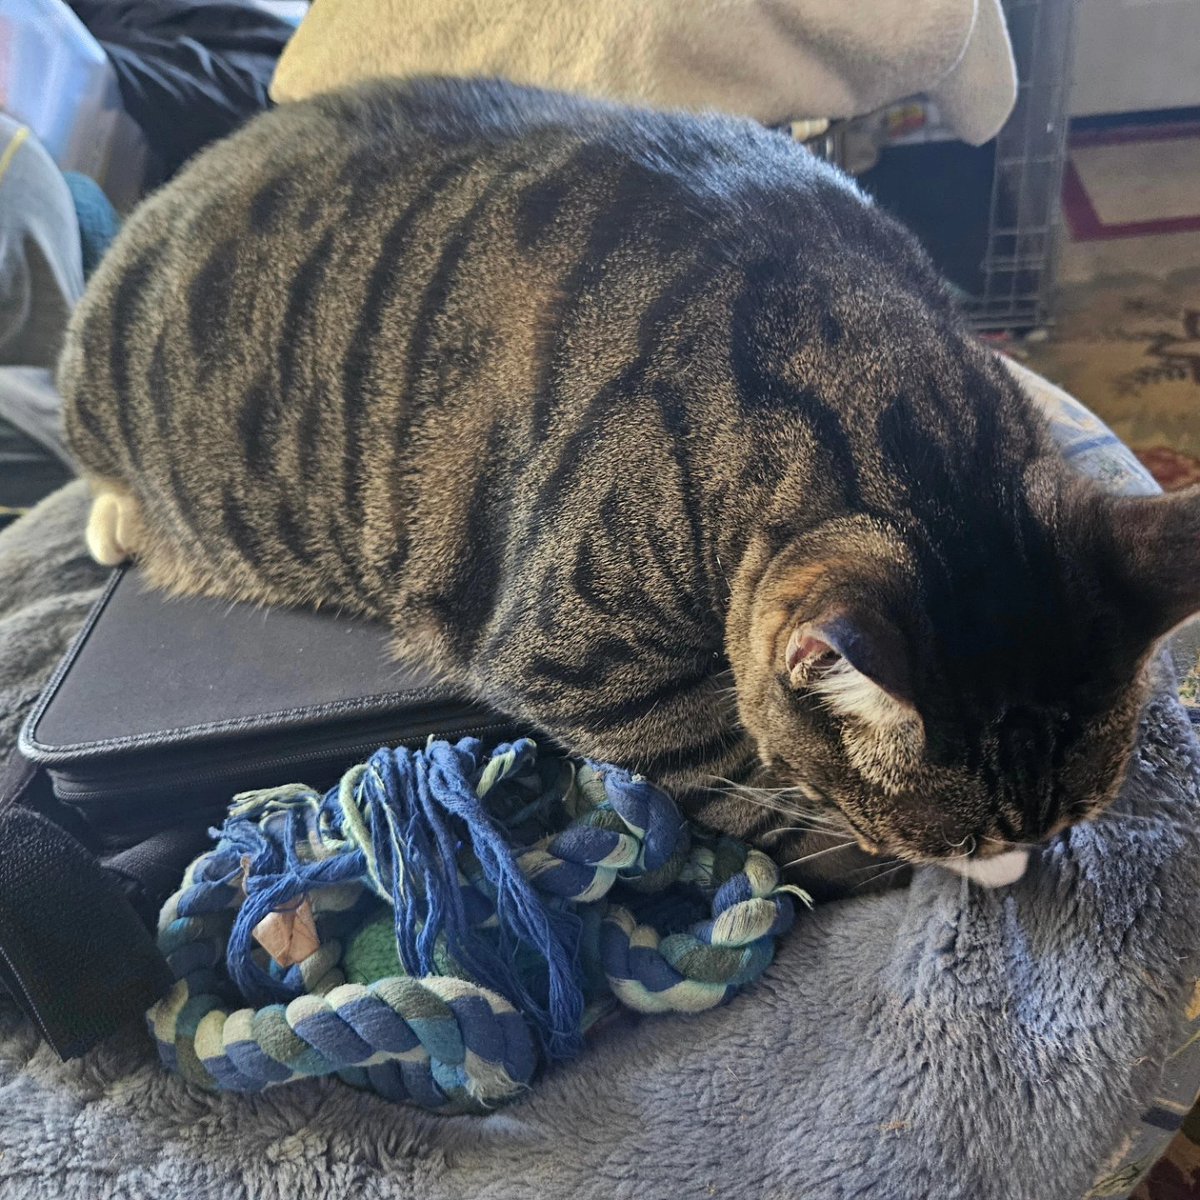 Crabbait decided I didn't have to write reviews today. 
Yes he refused to look at the camera.
#HaveYouReadReviews #hyrr #LapTop #CrabBait #Cat #Kitty #LazyCat #FatCat #Bangel #BangelCat #BarnCat #Rescue #RescueCat #MyCatSaidSo #LetMeAskMyCat #MyCatsTheBoss